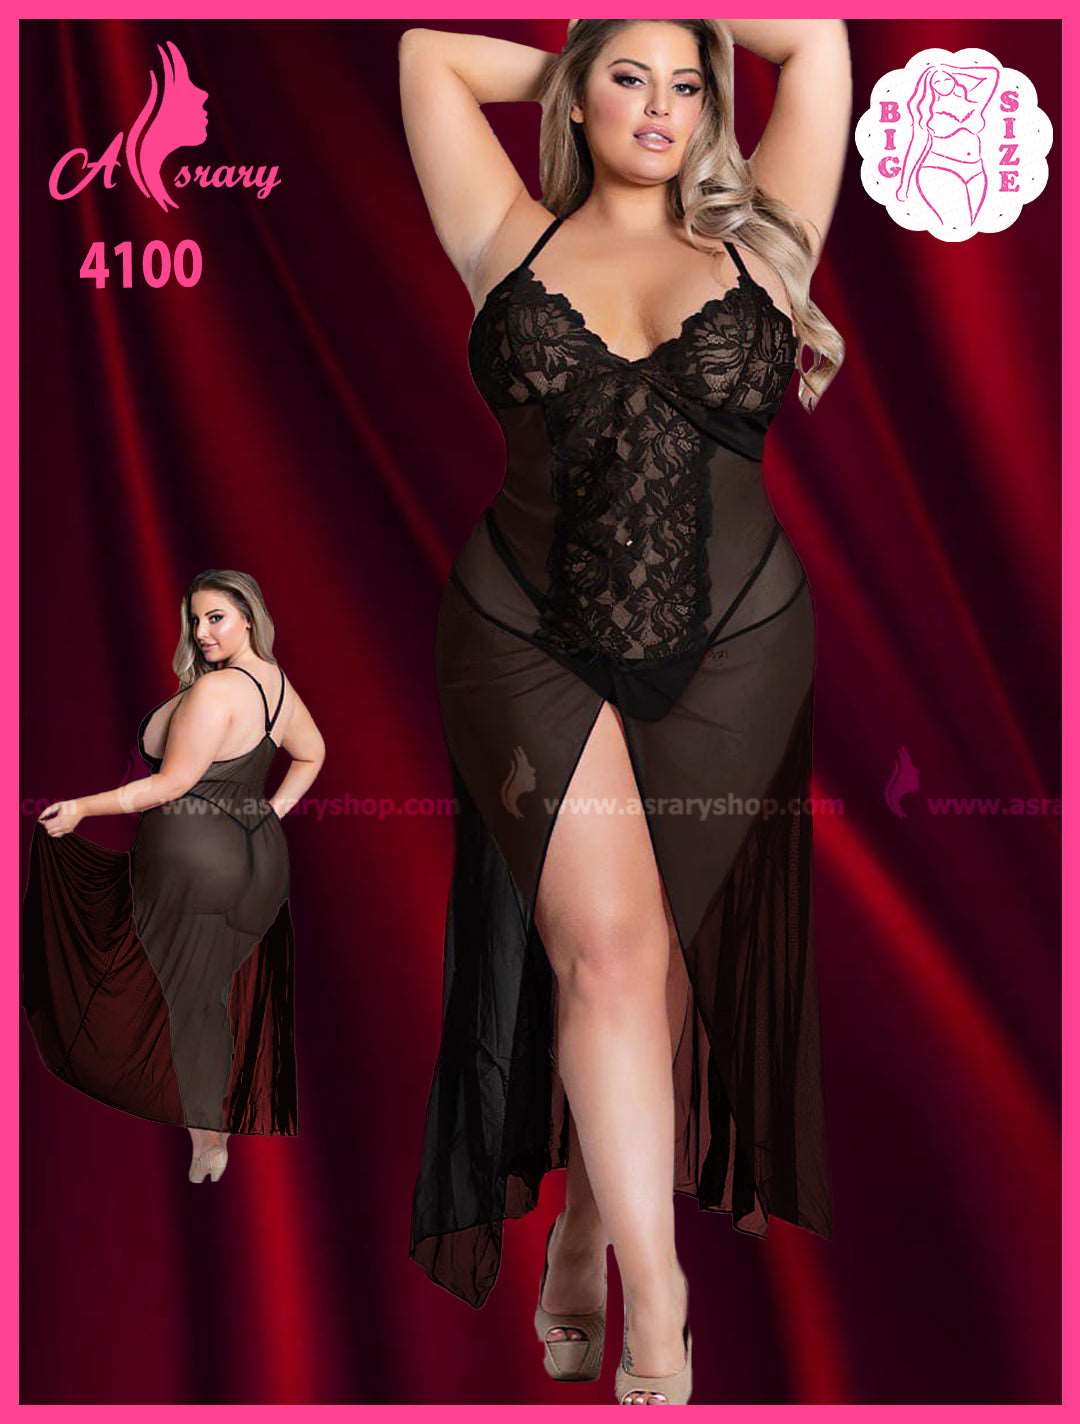 Asrary Shop Special Size Mesh and Lace Long Lingerie Nightgown 4100 2XL-3XL Black